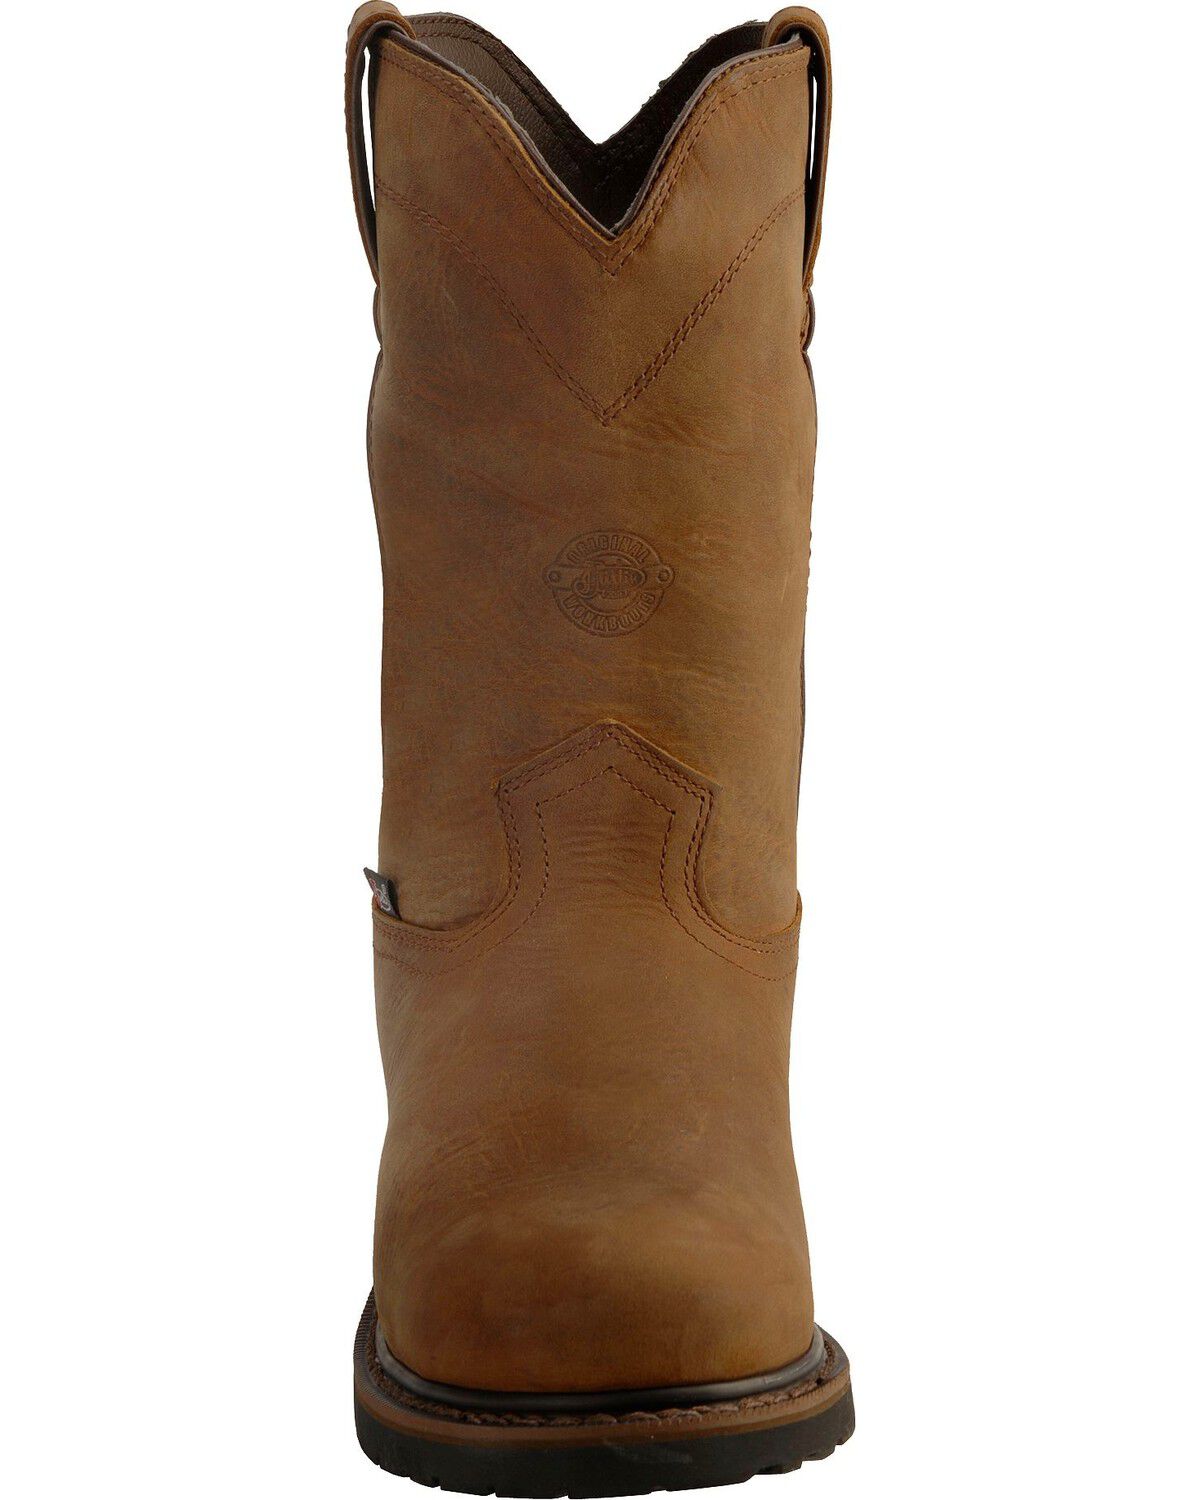 Justin Men's Wyoming Insulated 